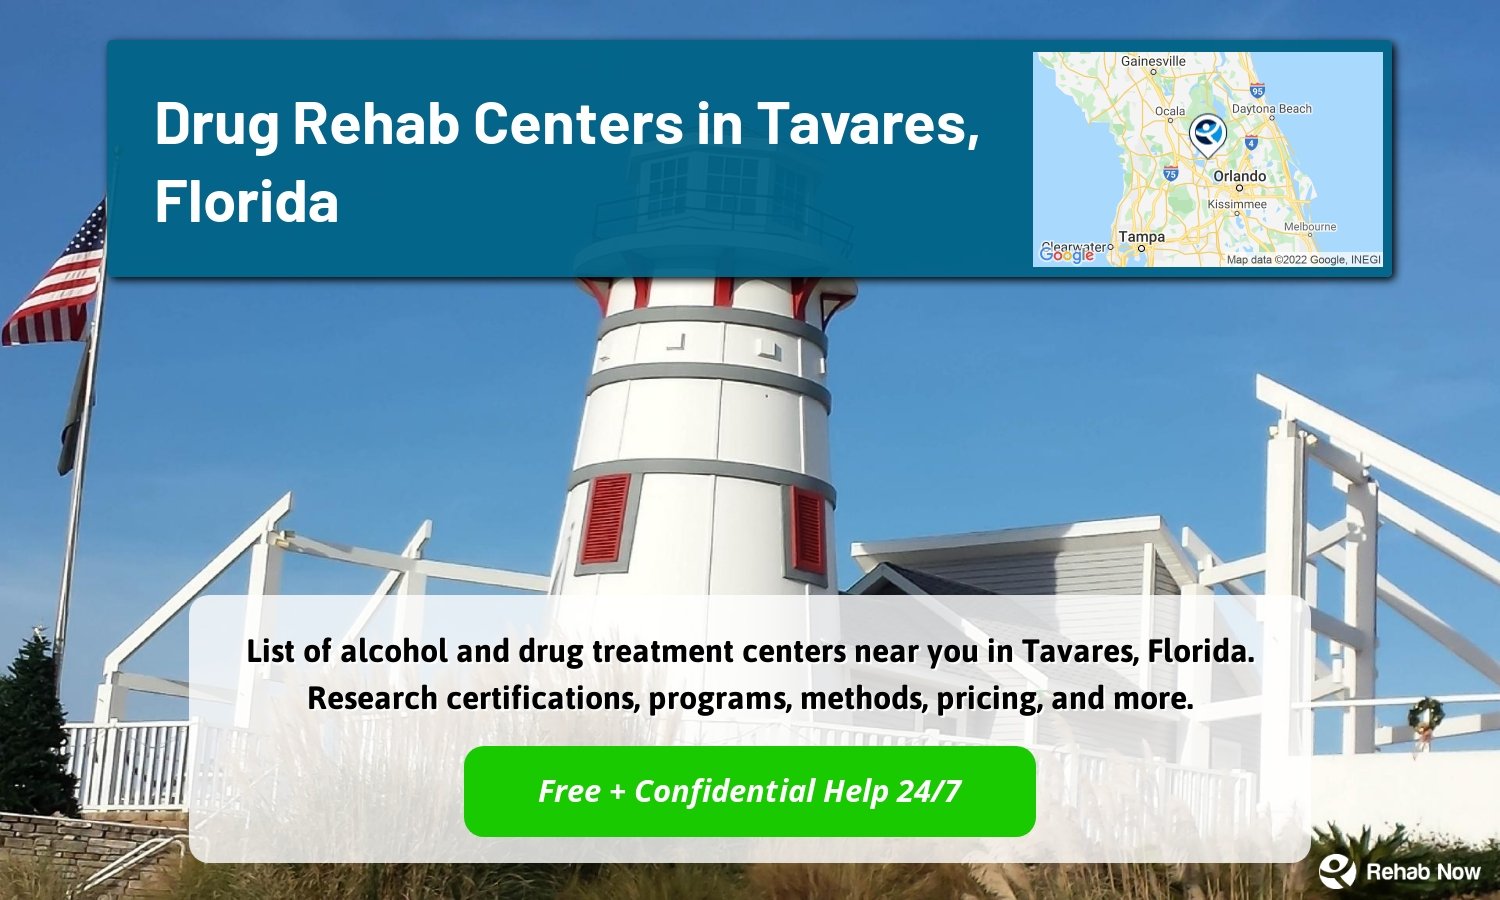 List of alcohol and drug treatment centers near you in Tavares, Florida. Research certifications, programs, methods, pricing, and more.